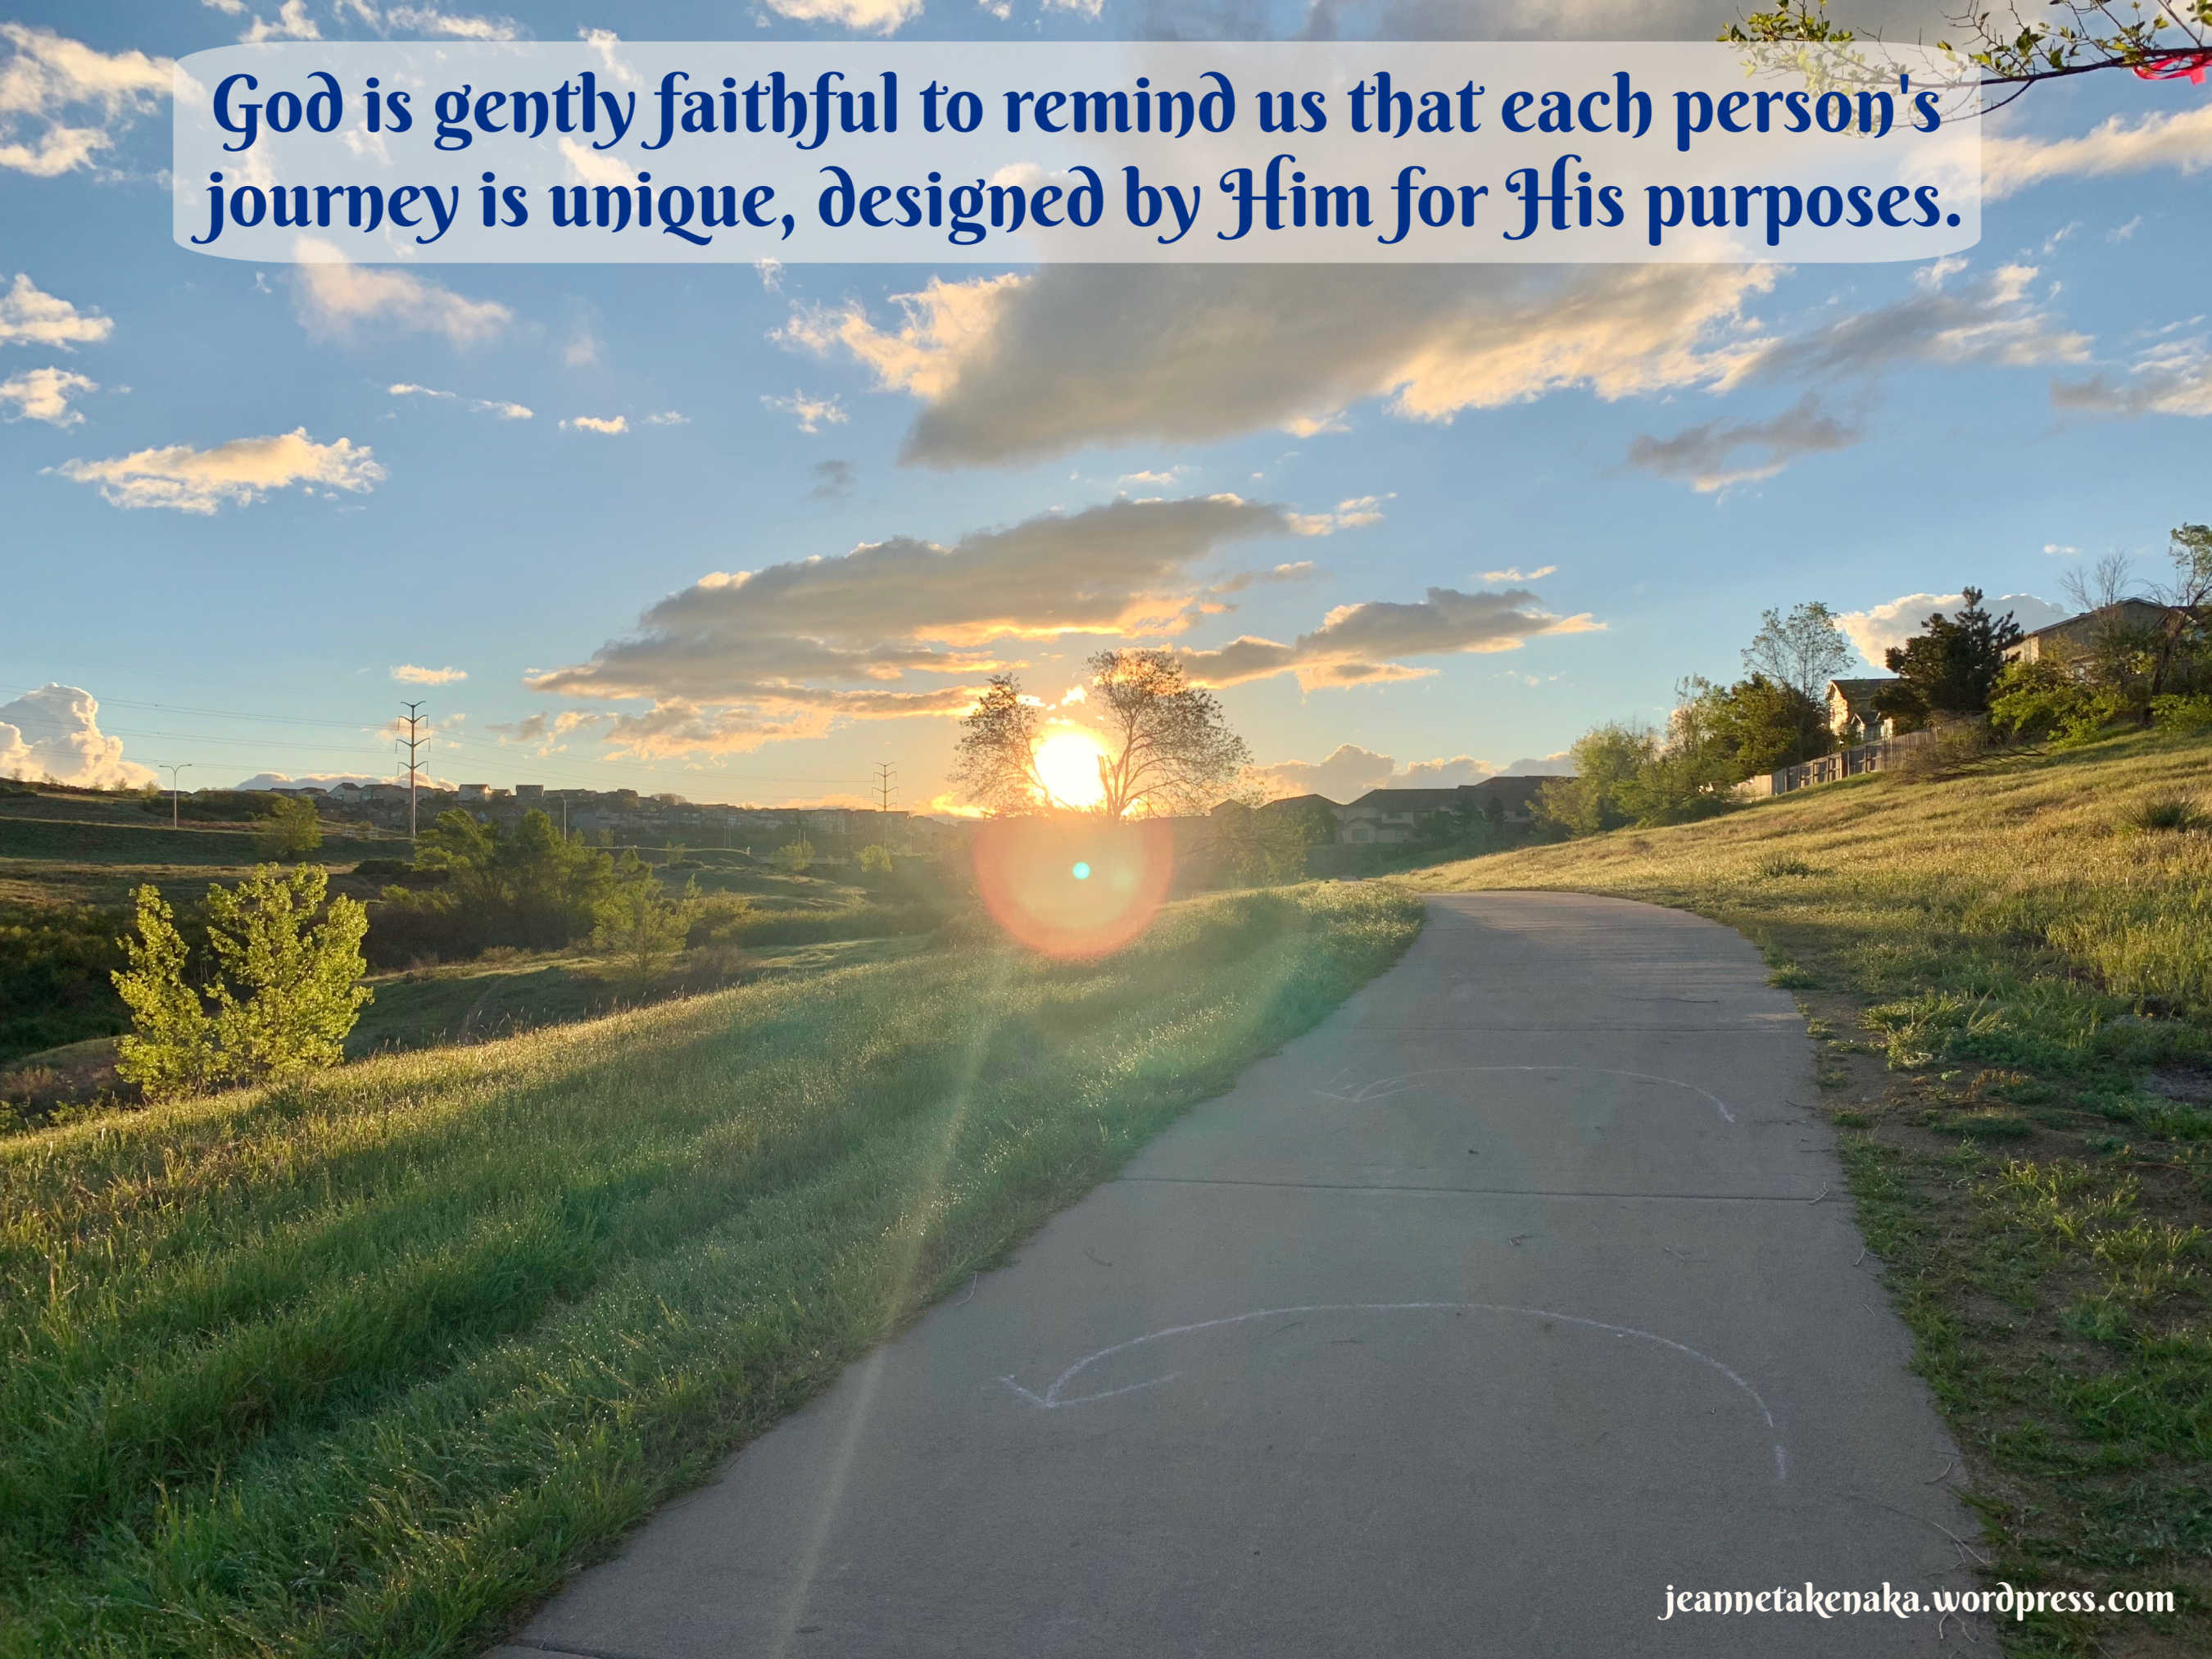 Meme-words: God is gently faithful to remind us that each person's journey is unique, designed by Hi for His purposes, with a picture backdrop of the sun coming up on a walking path